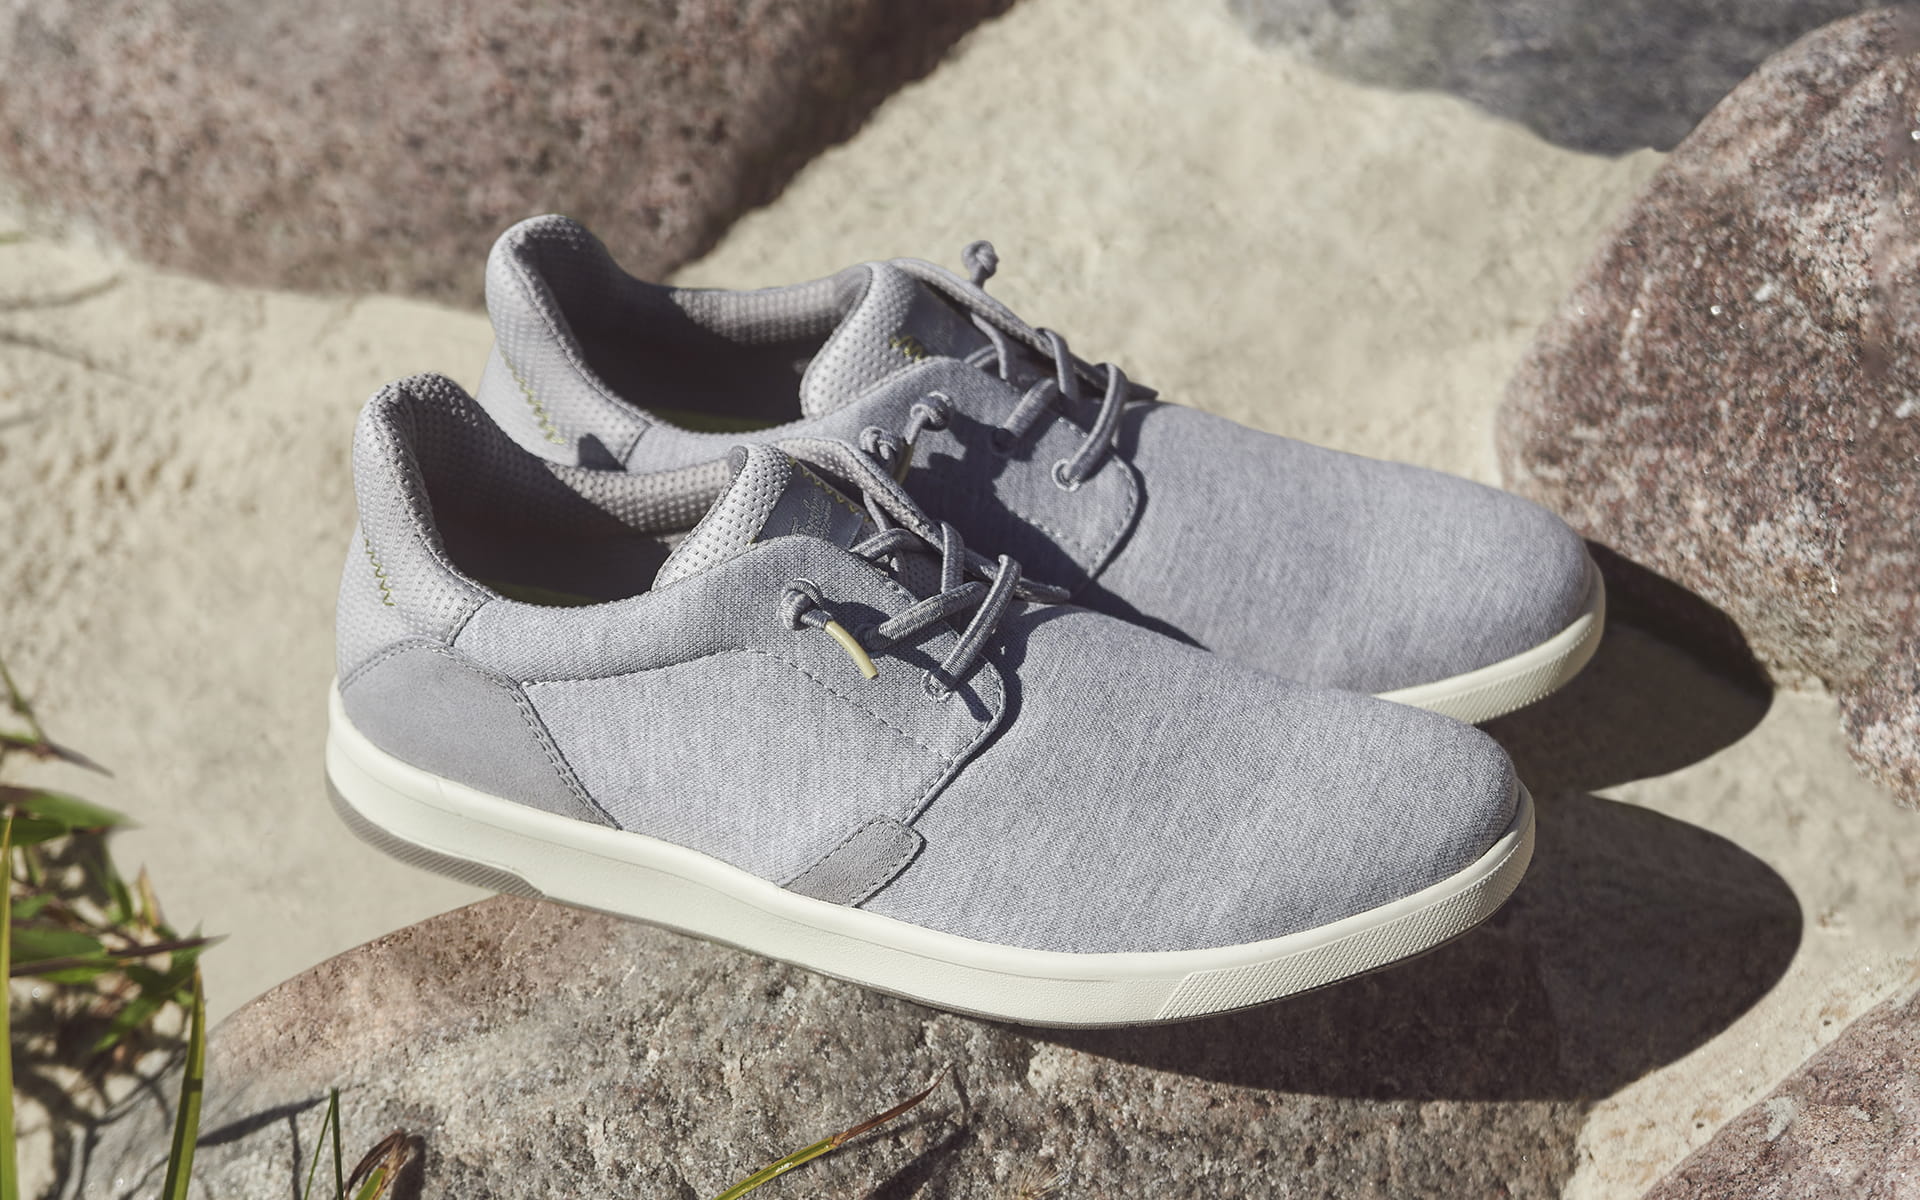 Click to shop the Florsheim Crossover slip on sneaker. Image features the style in grey.